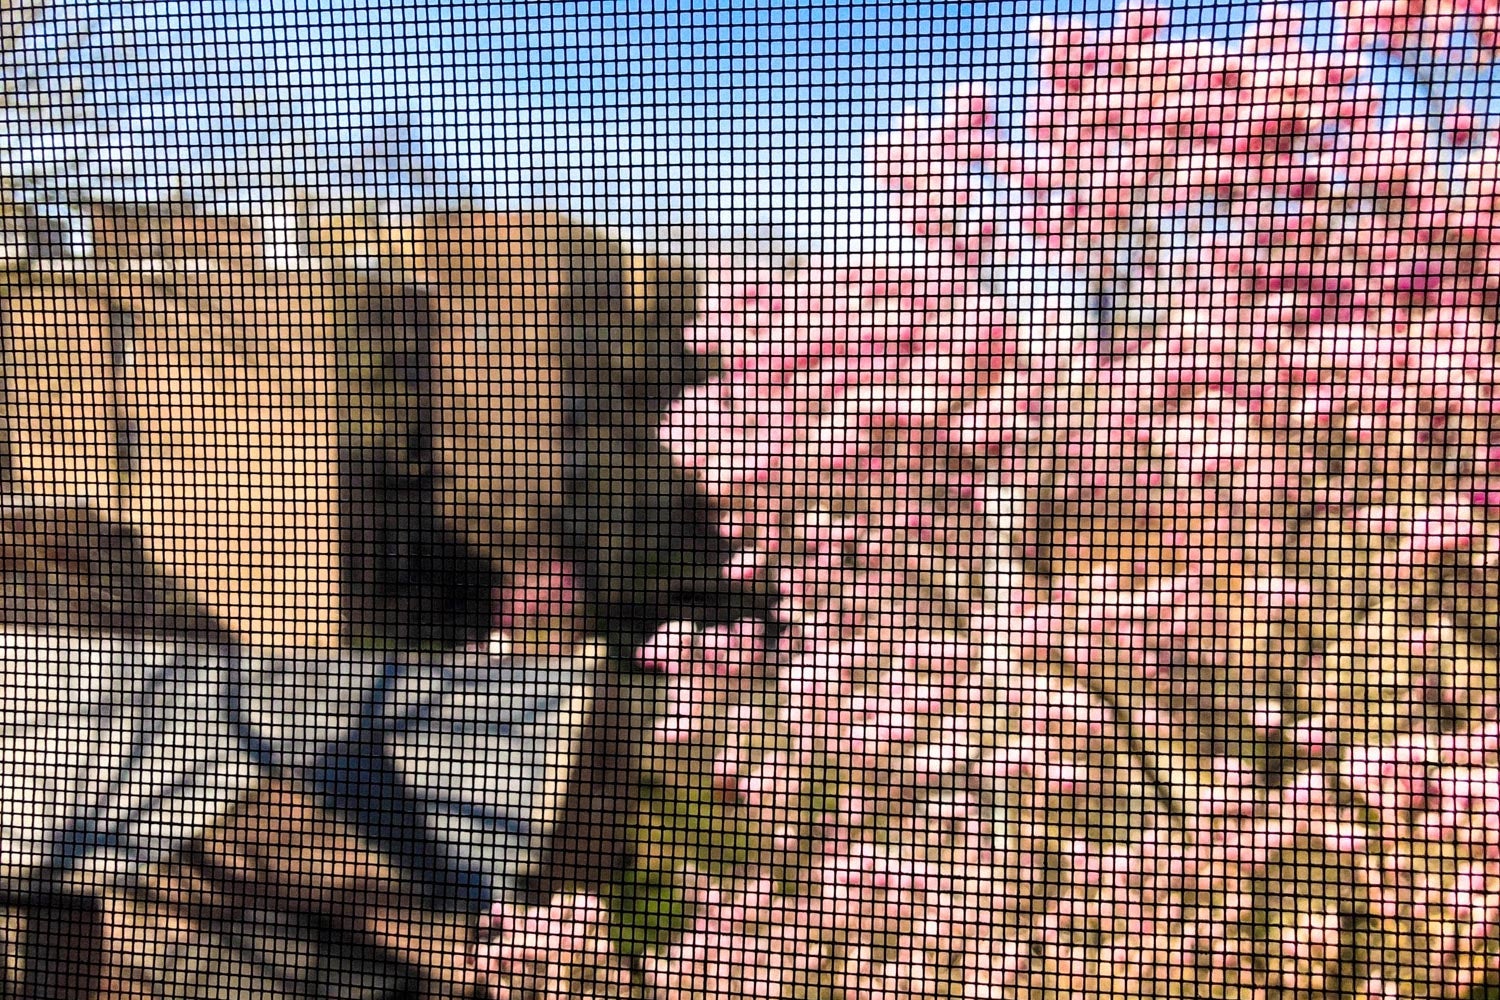 The mesh of a window screen gently blurs a view of a blooming cherry blossom tree.